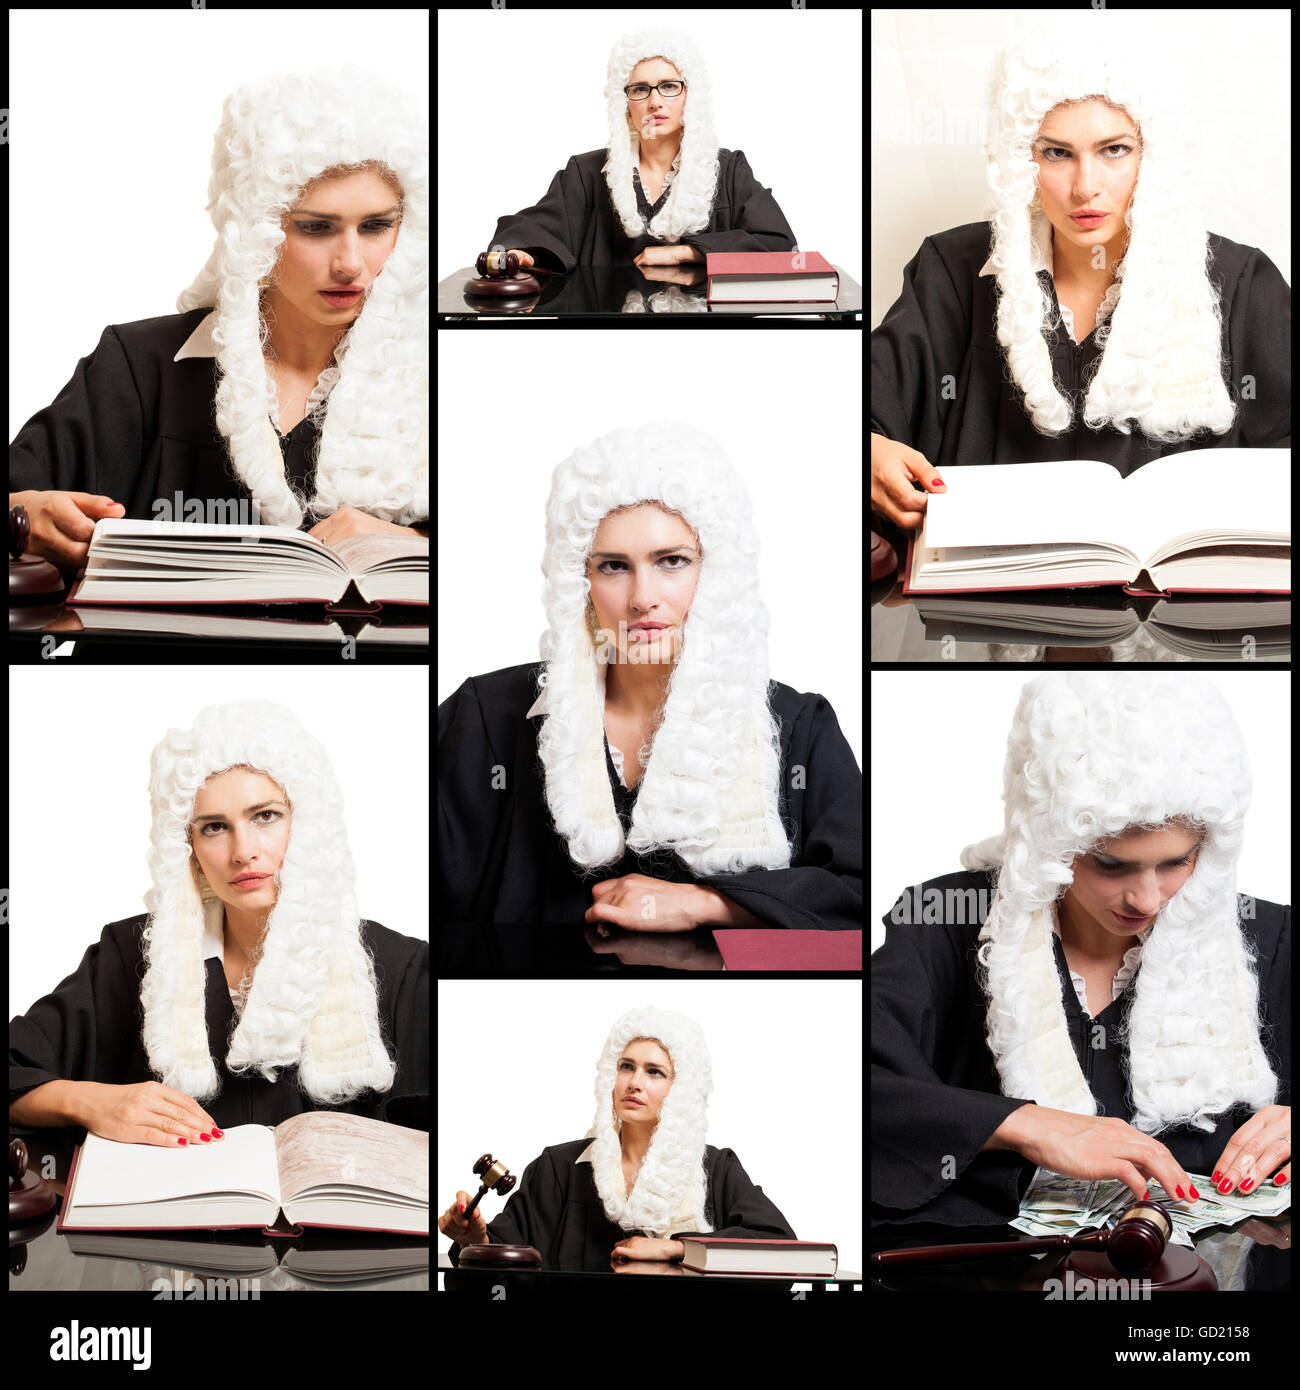 Portraits of Female Judge wearing a wig and black mantle.Collage. Stock Photo